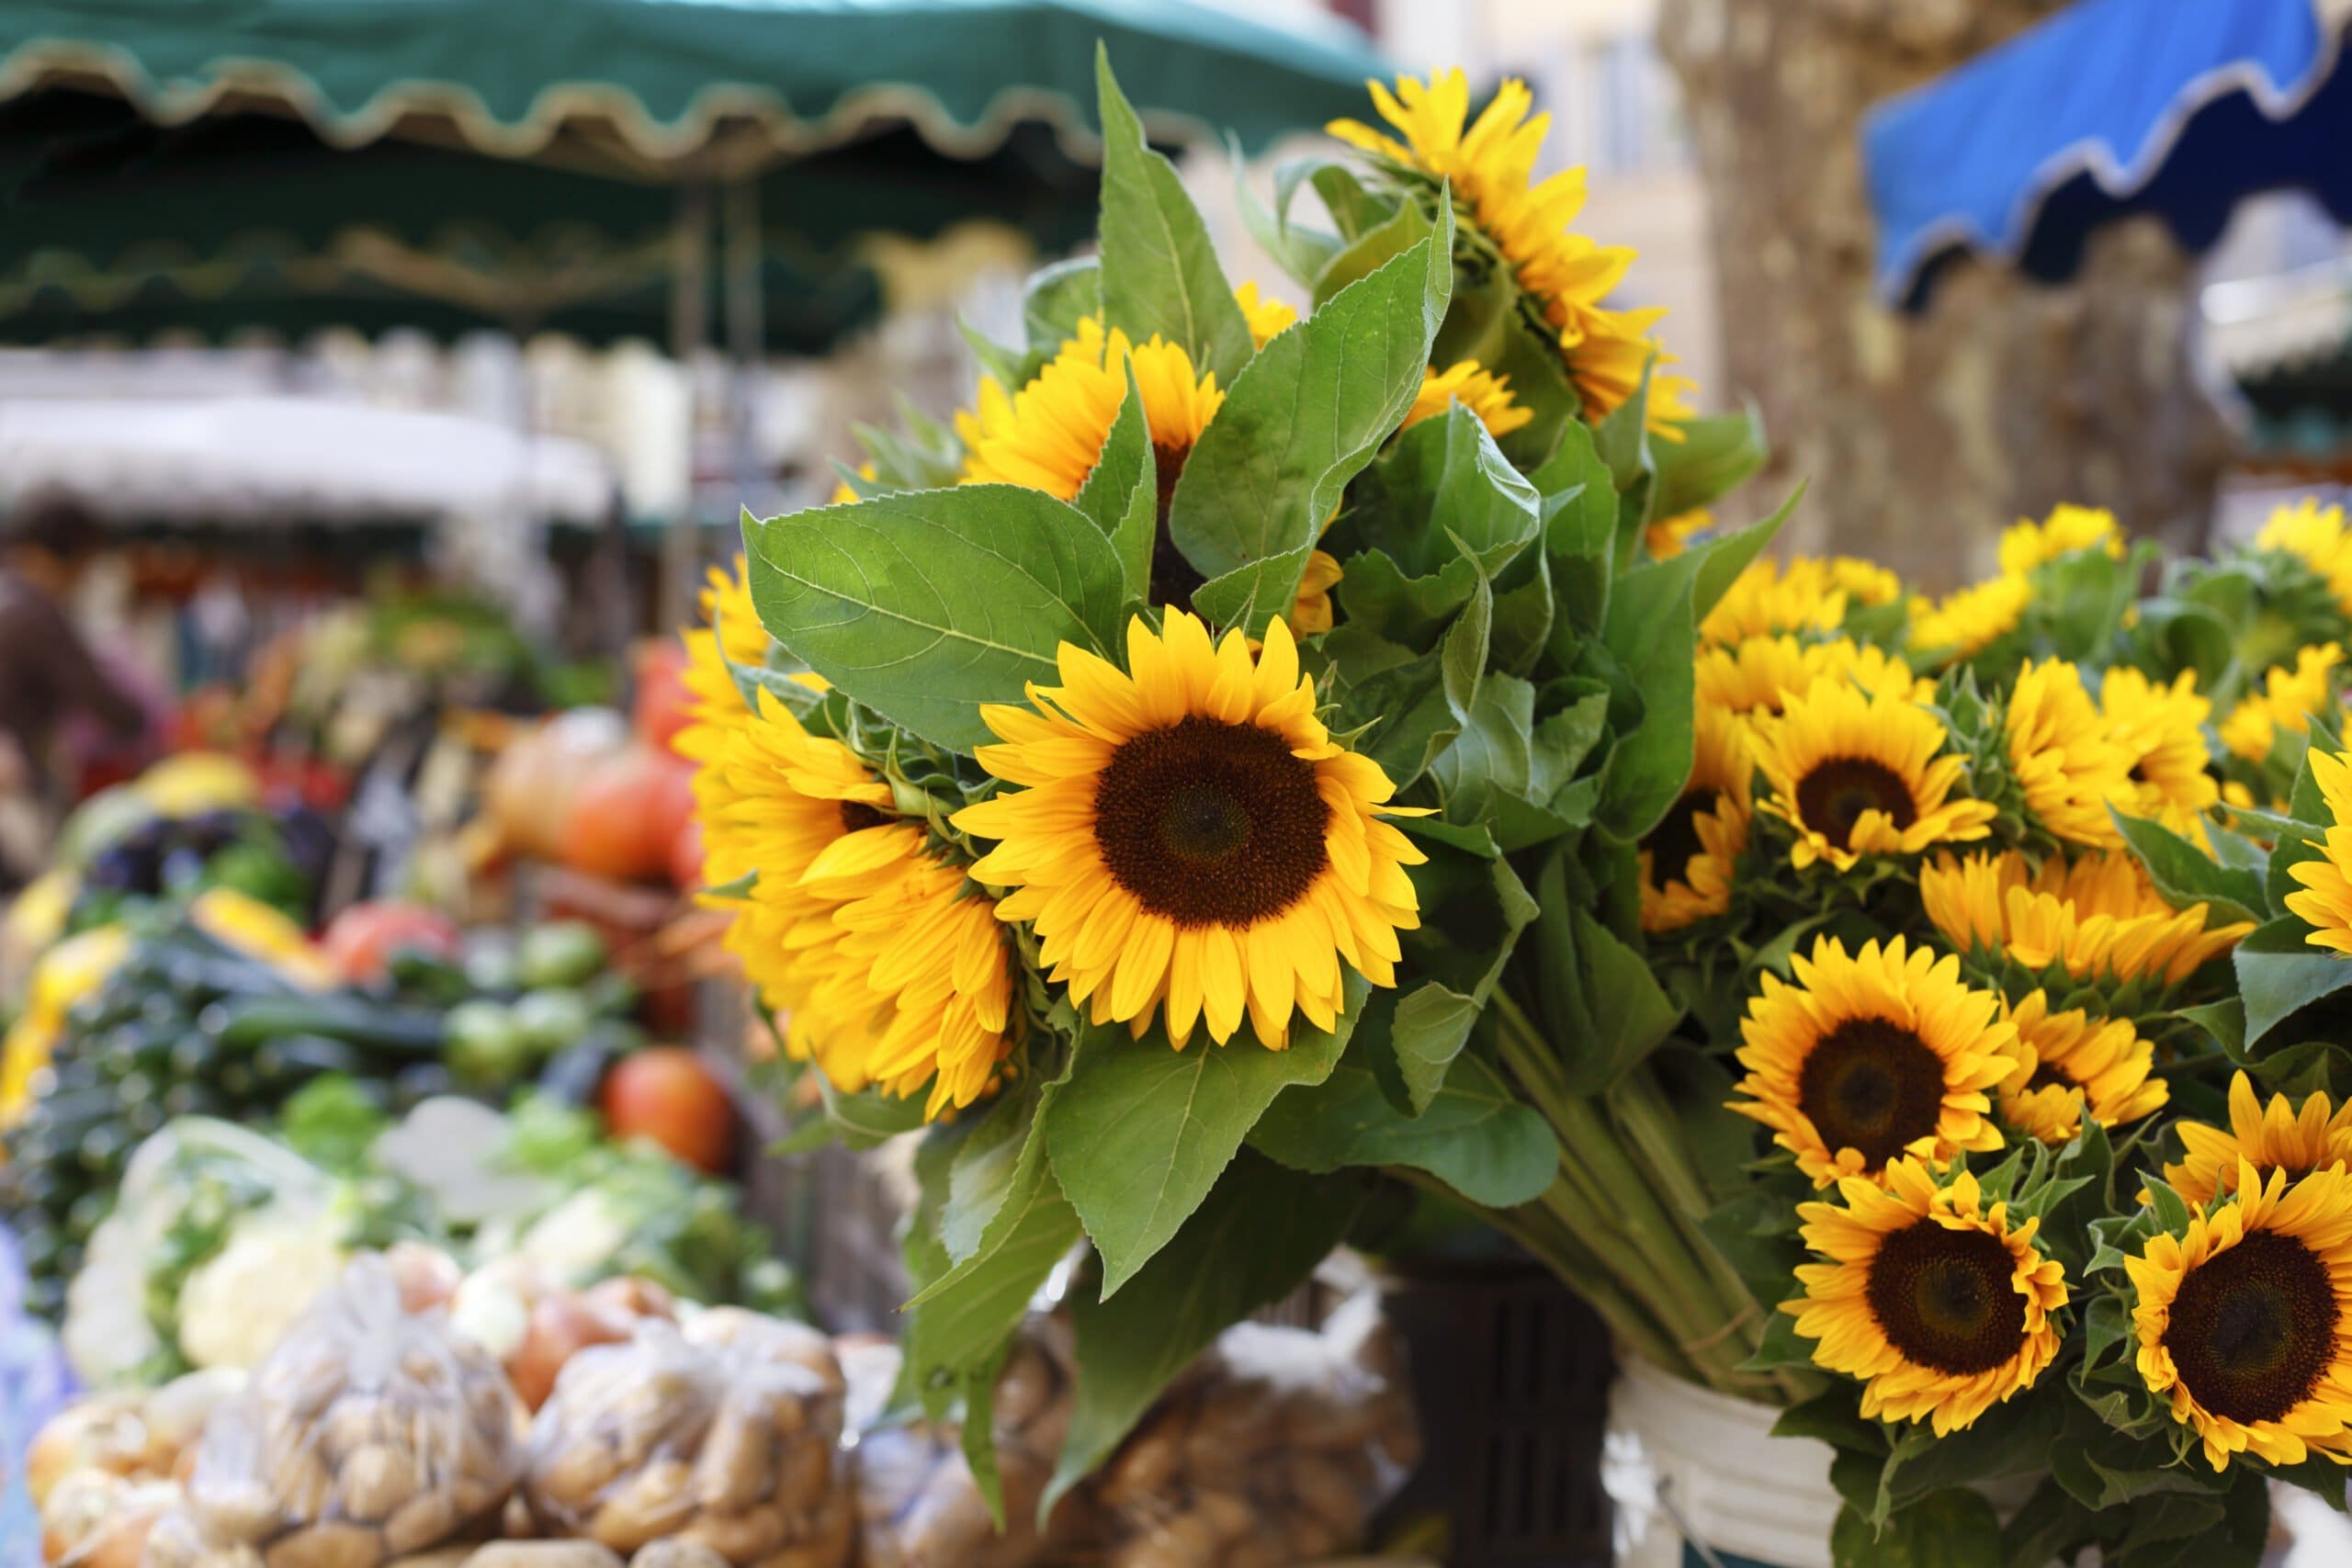 Sunflowers, fruits, and vegetables at farmers market near Saratoga, NY